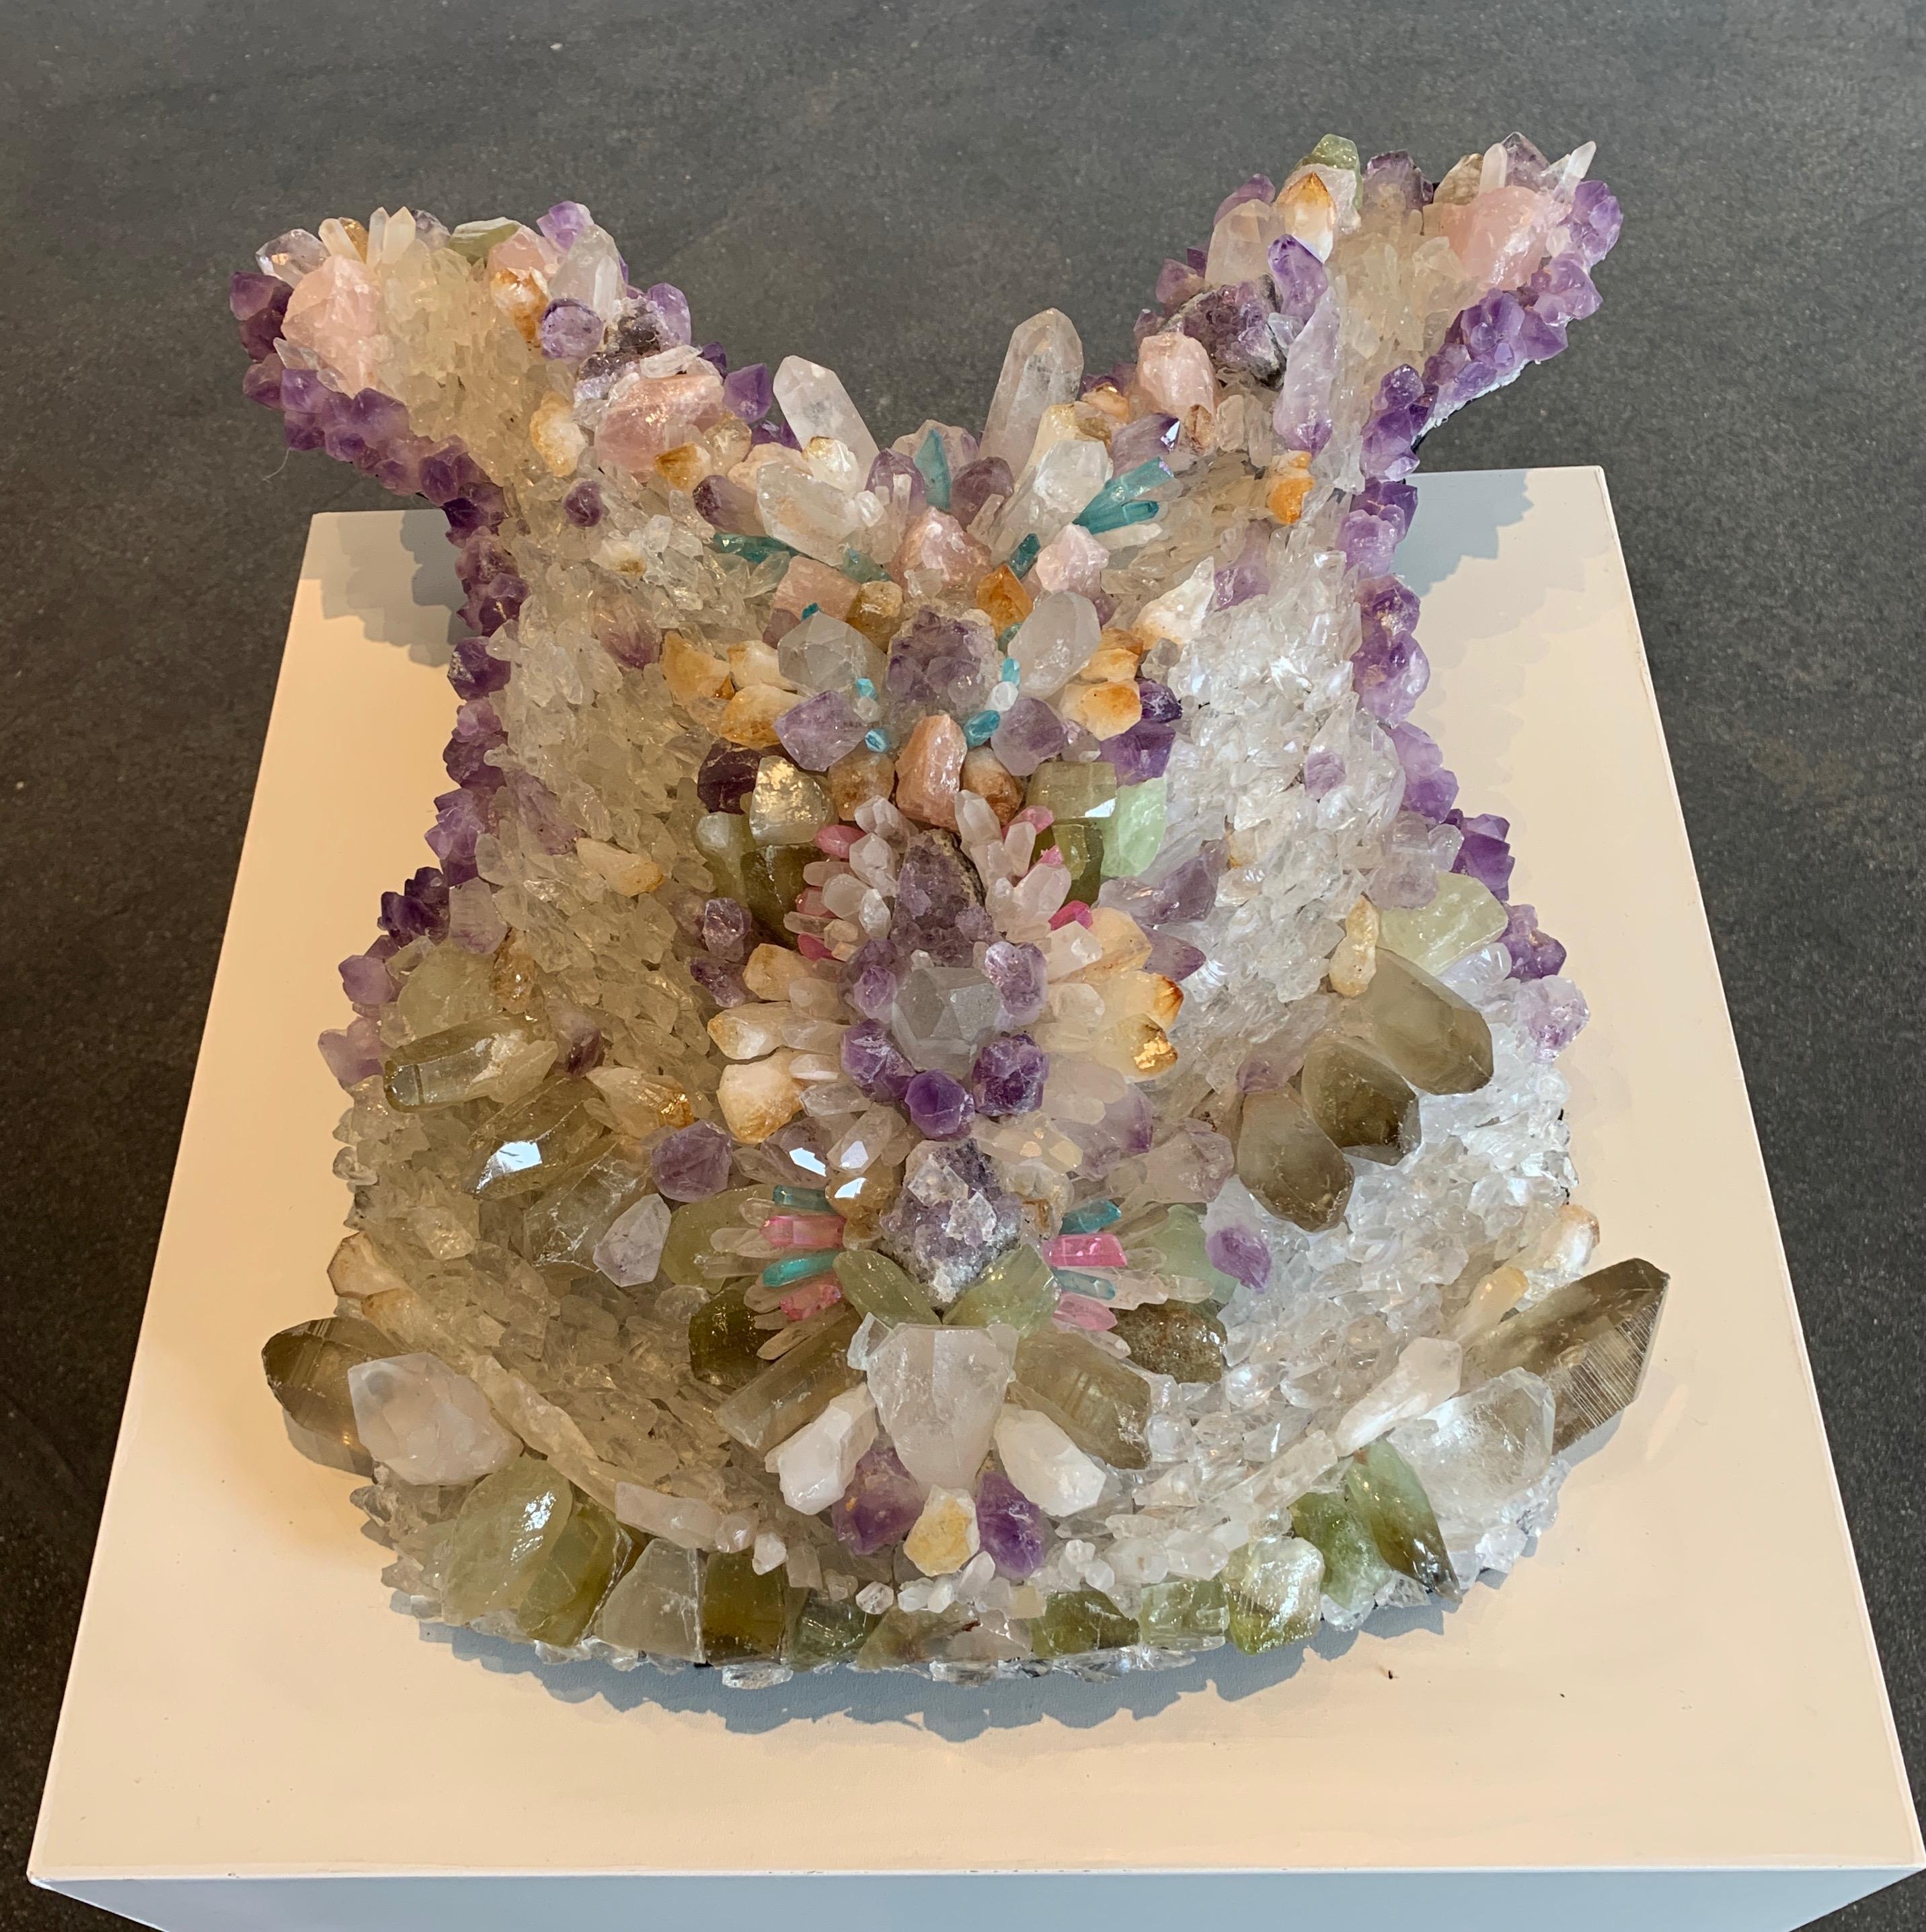 Crystals - Skins Series - Contemporary Sculpture by Melissa Meier